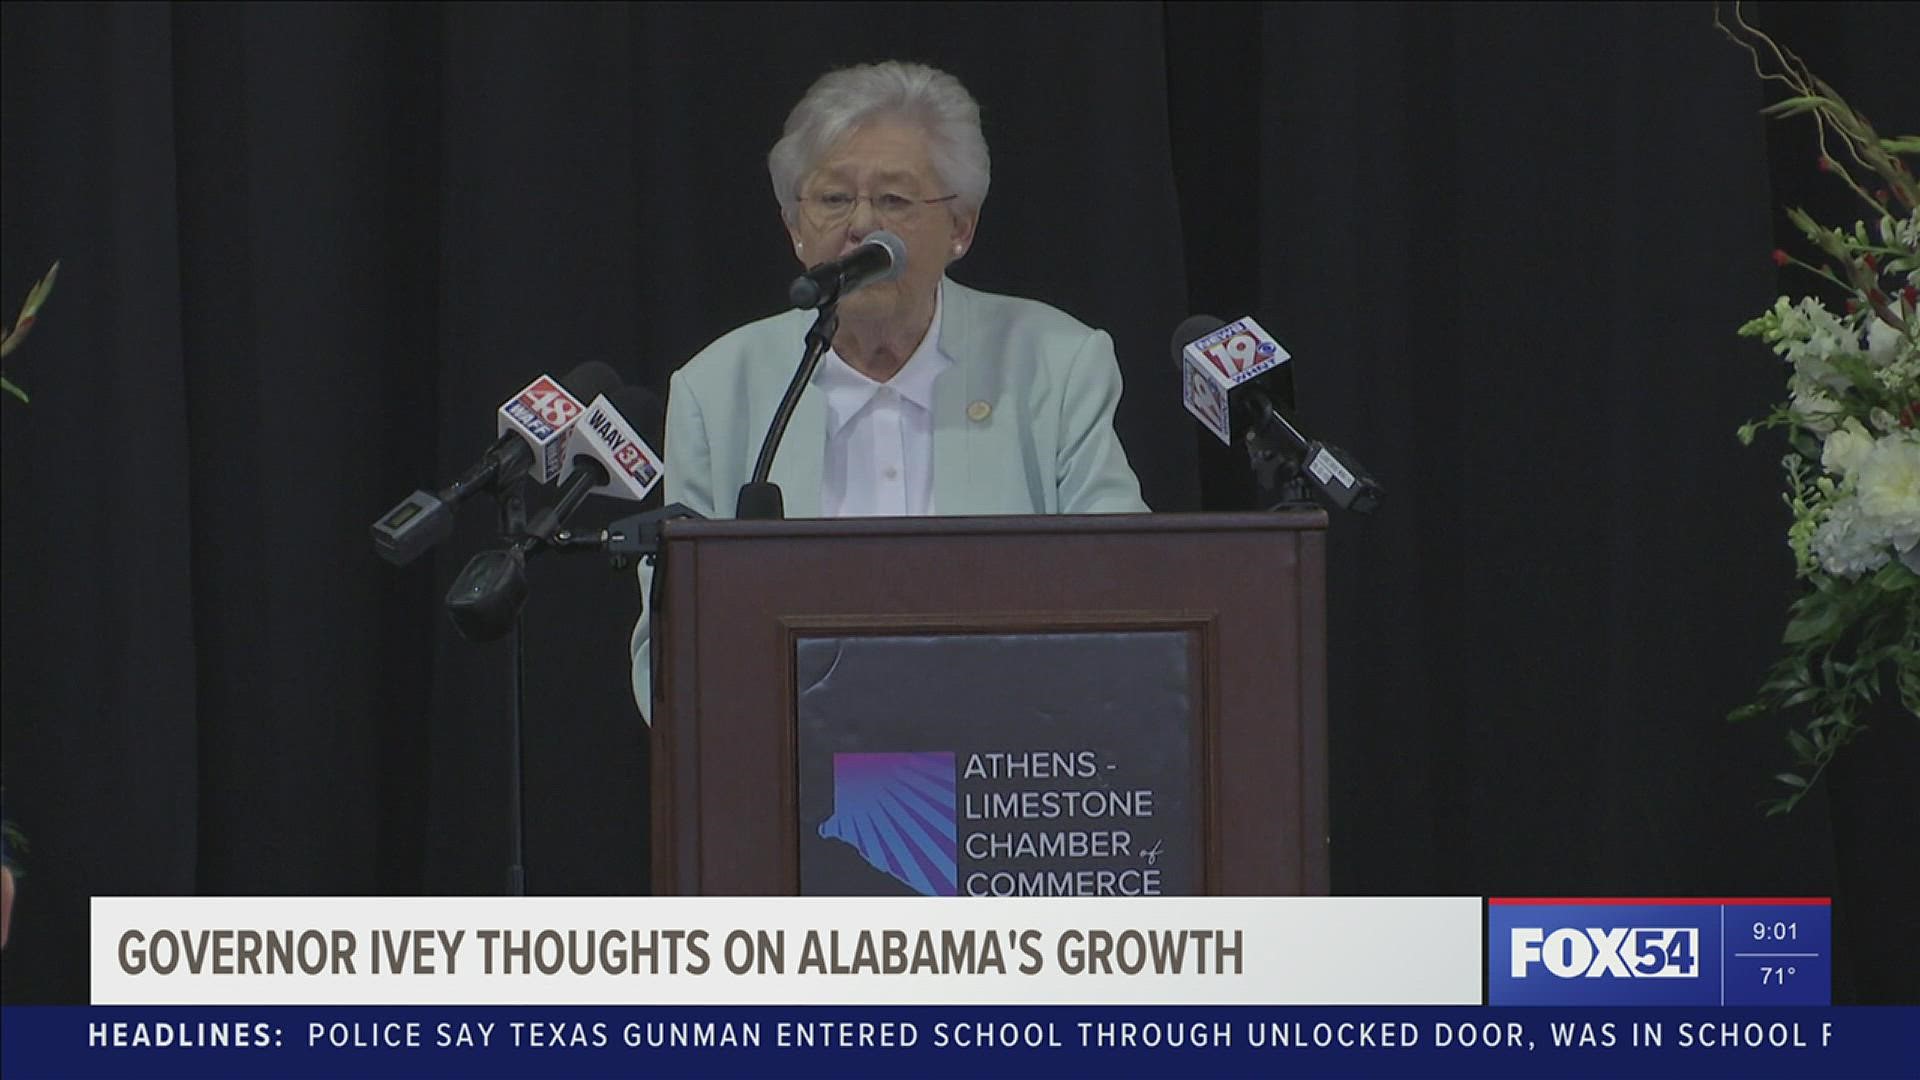 Gov. Ivey gave her thoughts on Alabama's Growth at Athens Chamber of Commerce's Luncheon as an honorary guest speaker.